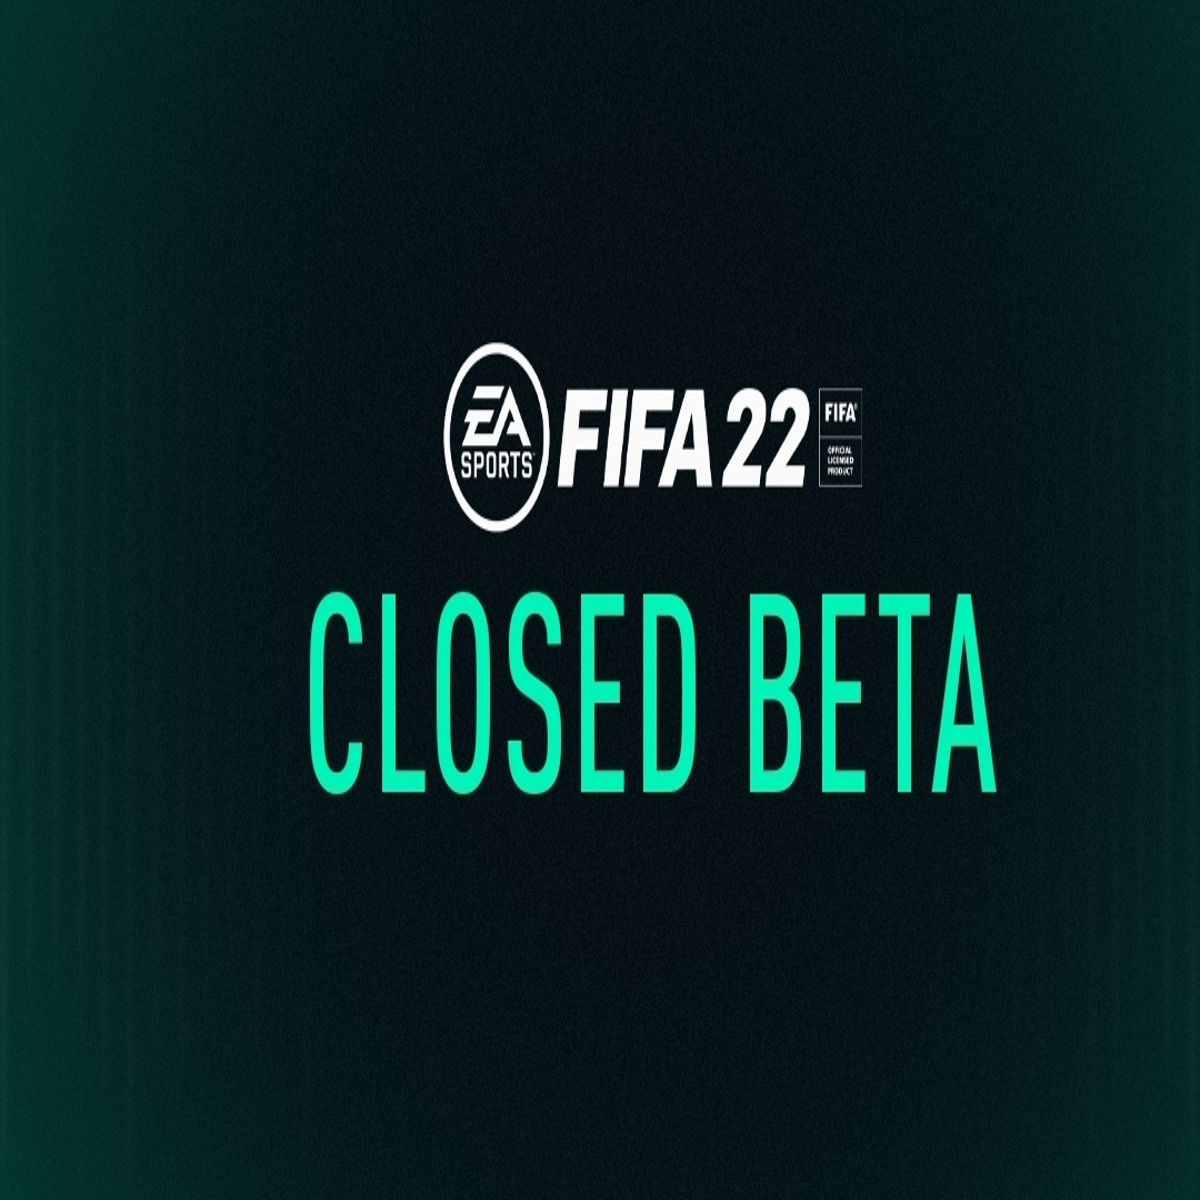 HOW TO DOWNLOAD FIFA MOBILE 22 BETA 